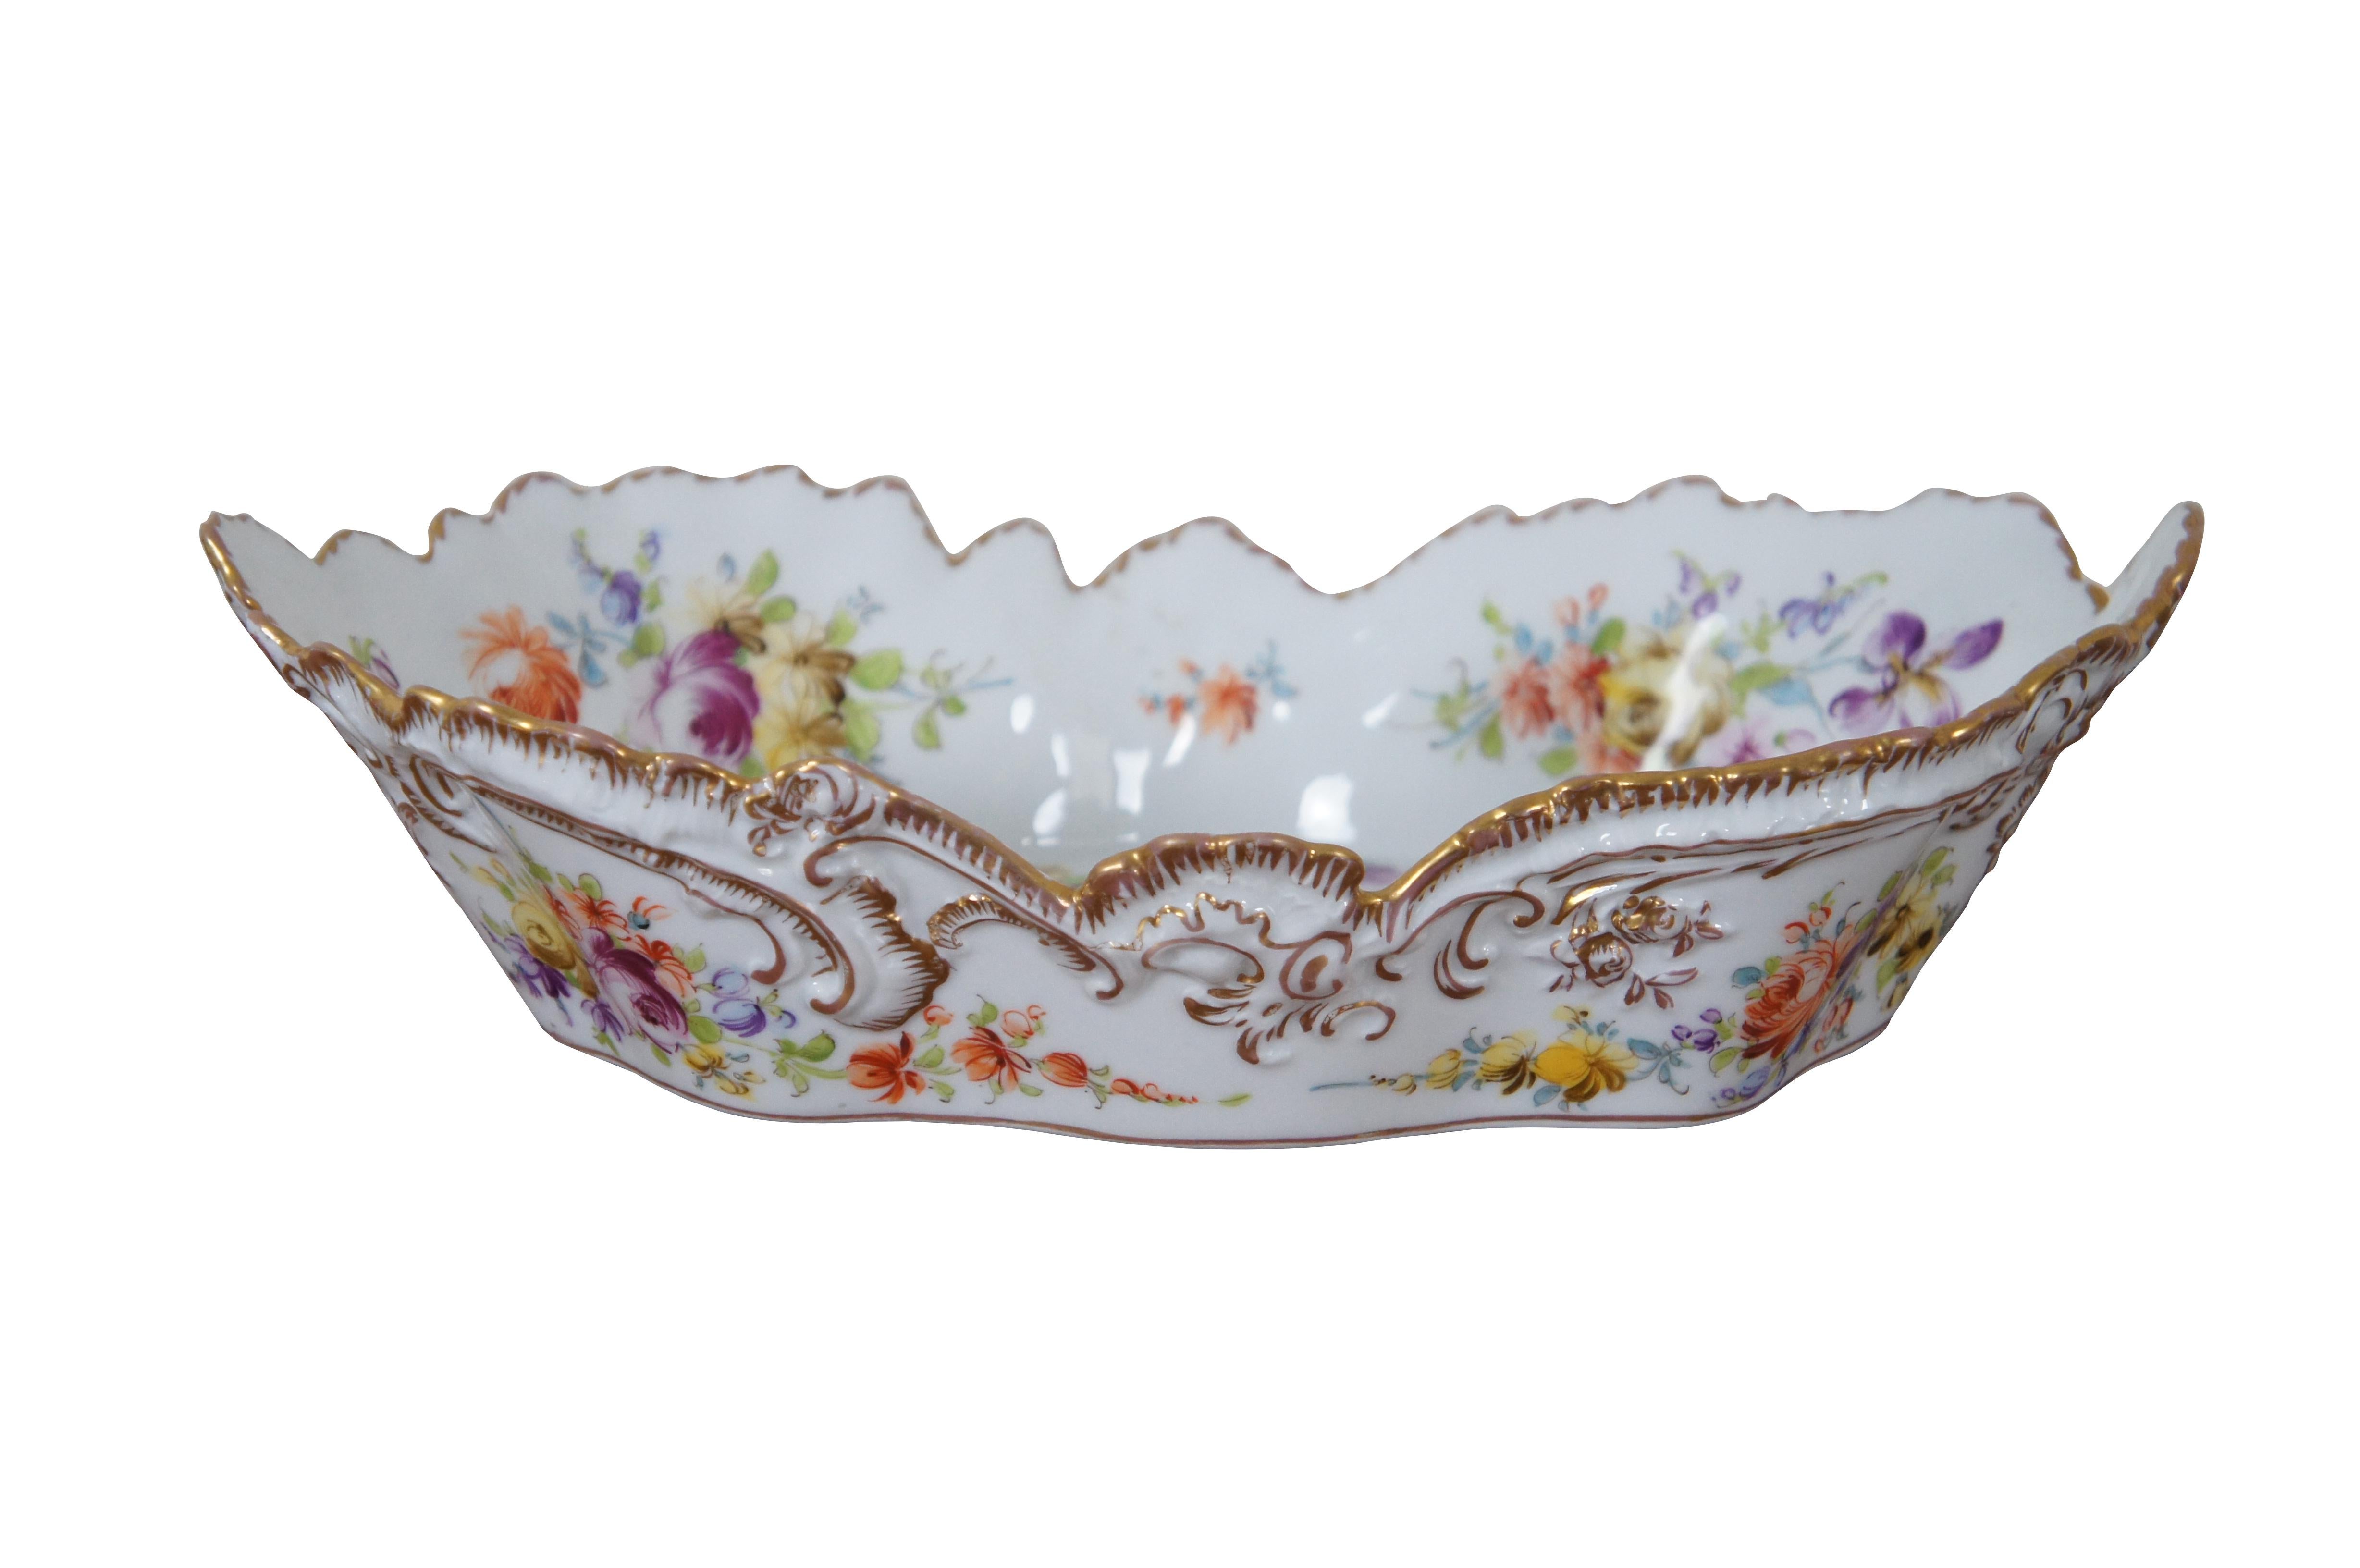 Antique German Dresden crown H mark centerpiece bowl or serving compote.  Made of porcelain featuring scalloped oval form with floral design and gold accents.  

Attributed to Adolf Hamman, located in the Serrestrasse 8 and founded in 1866. The